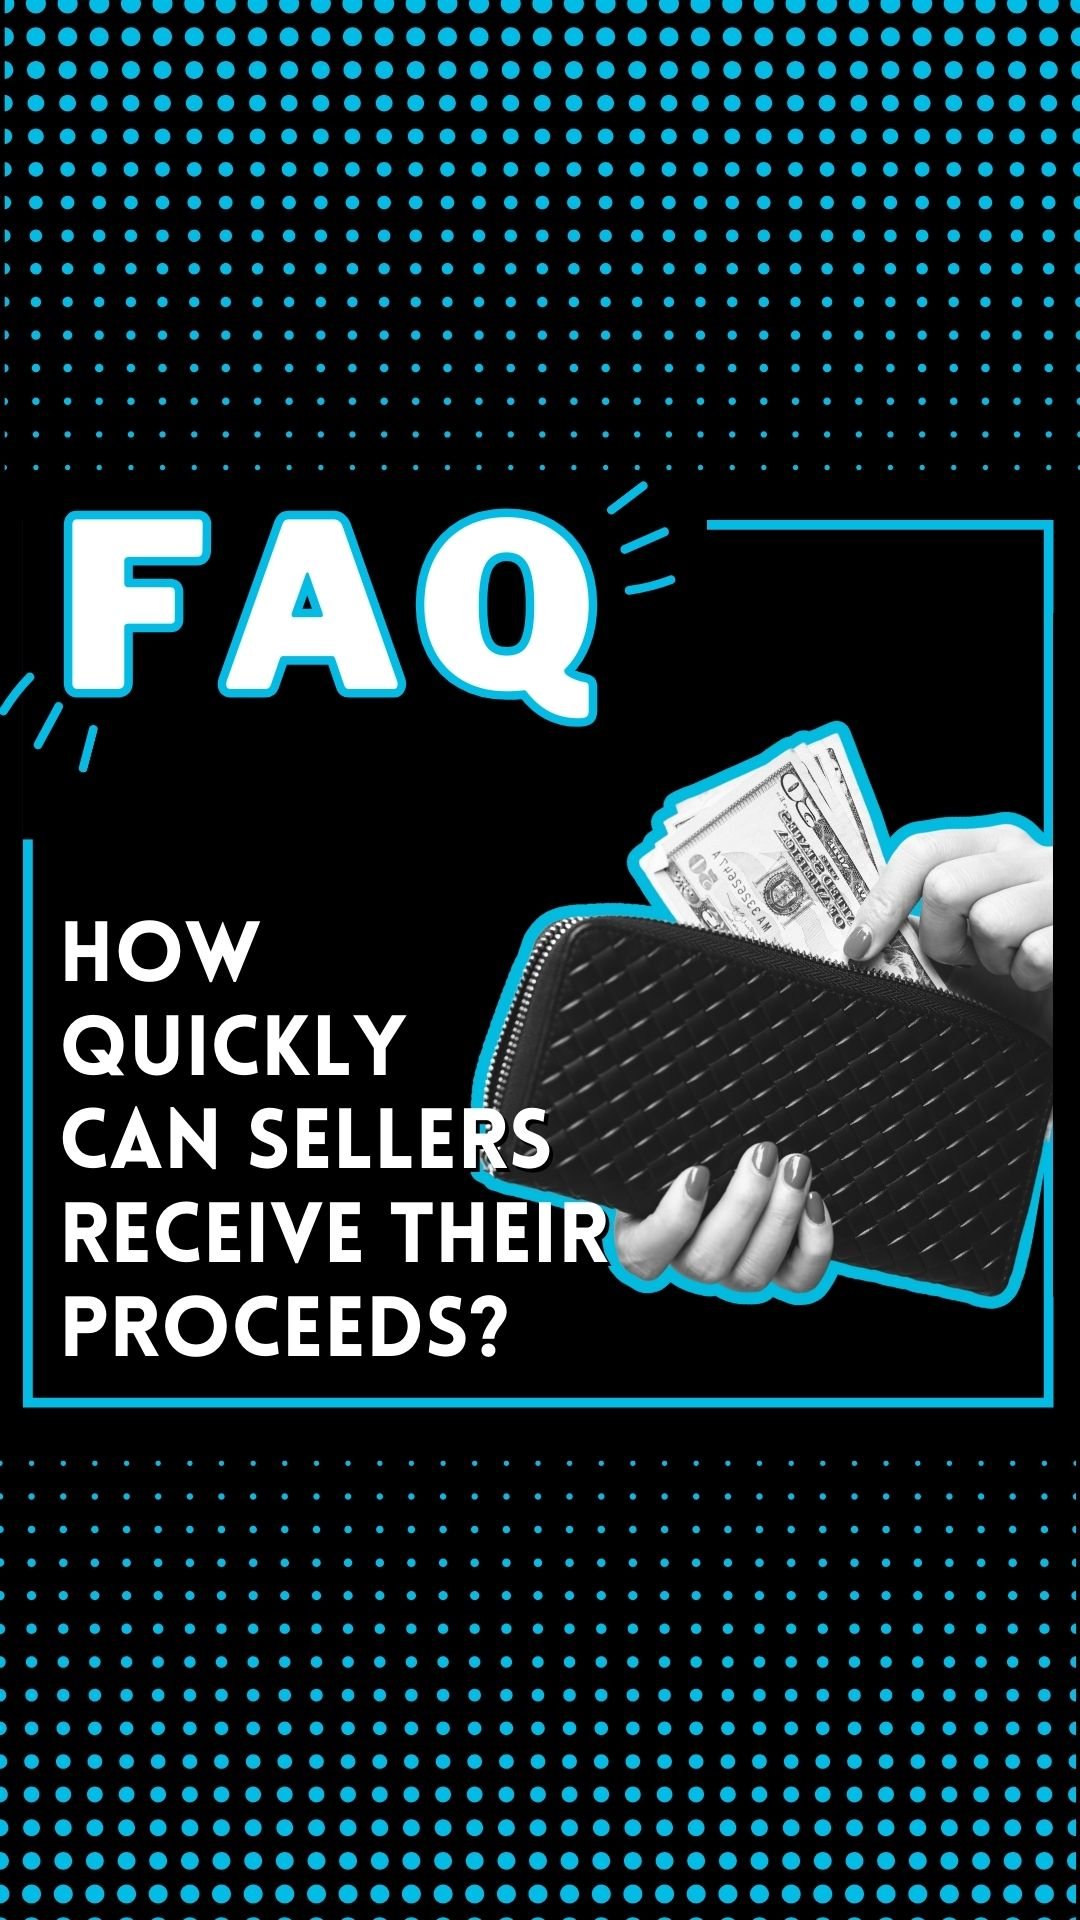 How quickly can sellers receive their proceeds?